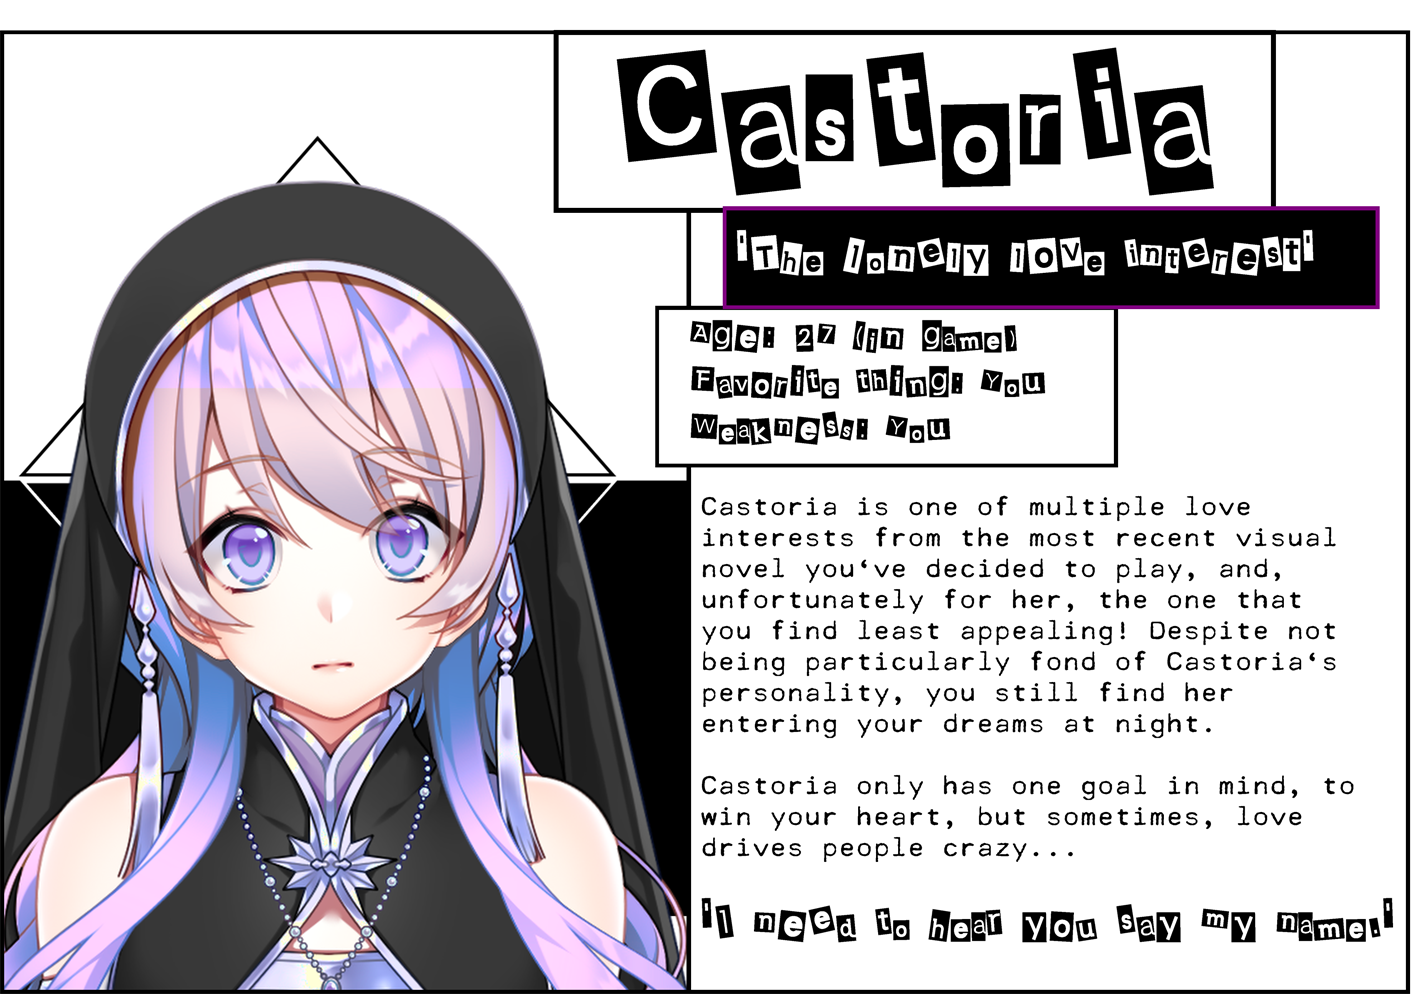 Leave On Overnight! Anime Catching Simulator Script For Mobile